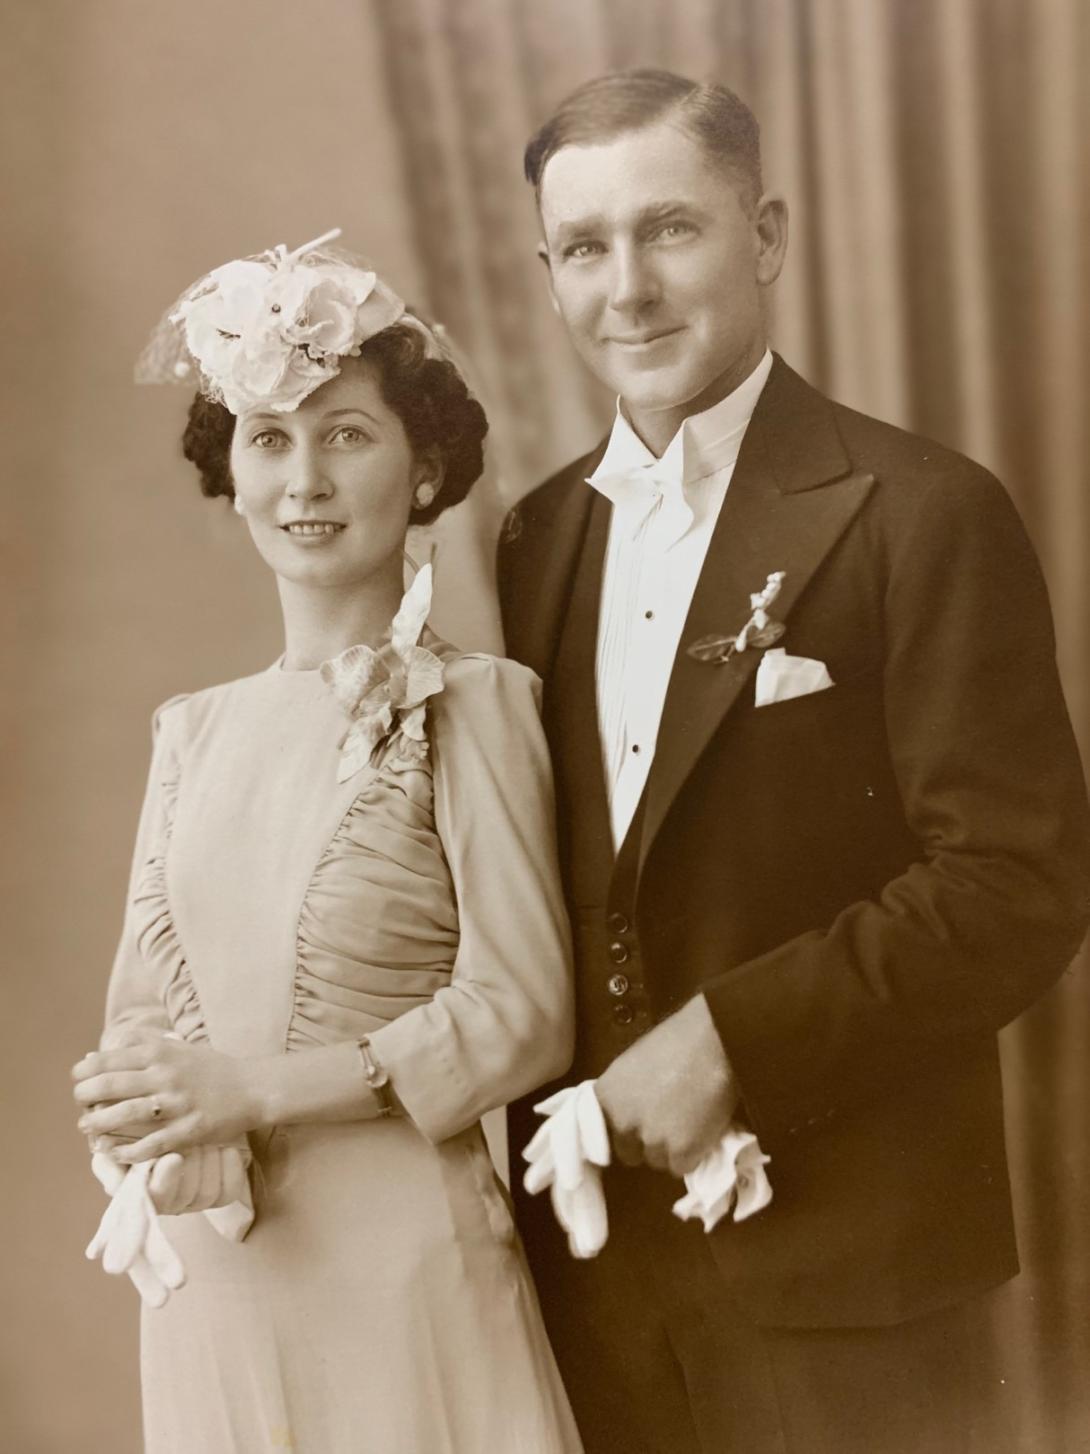 A vintage, sepid-toned photo of a wedding couple in 1940